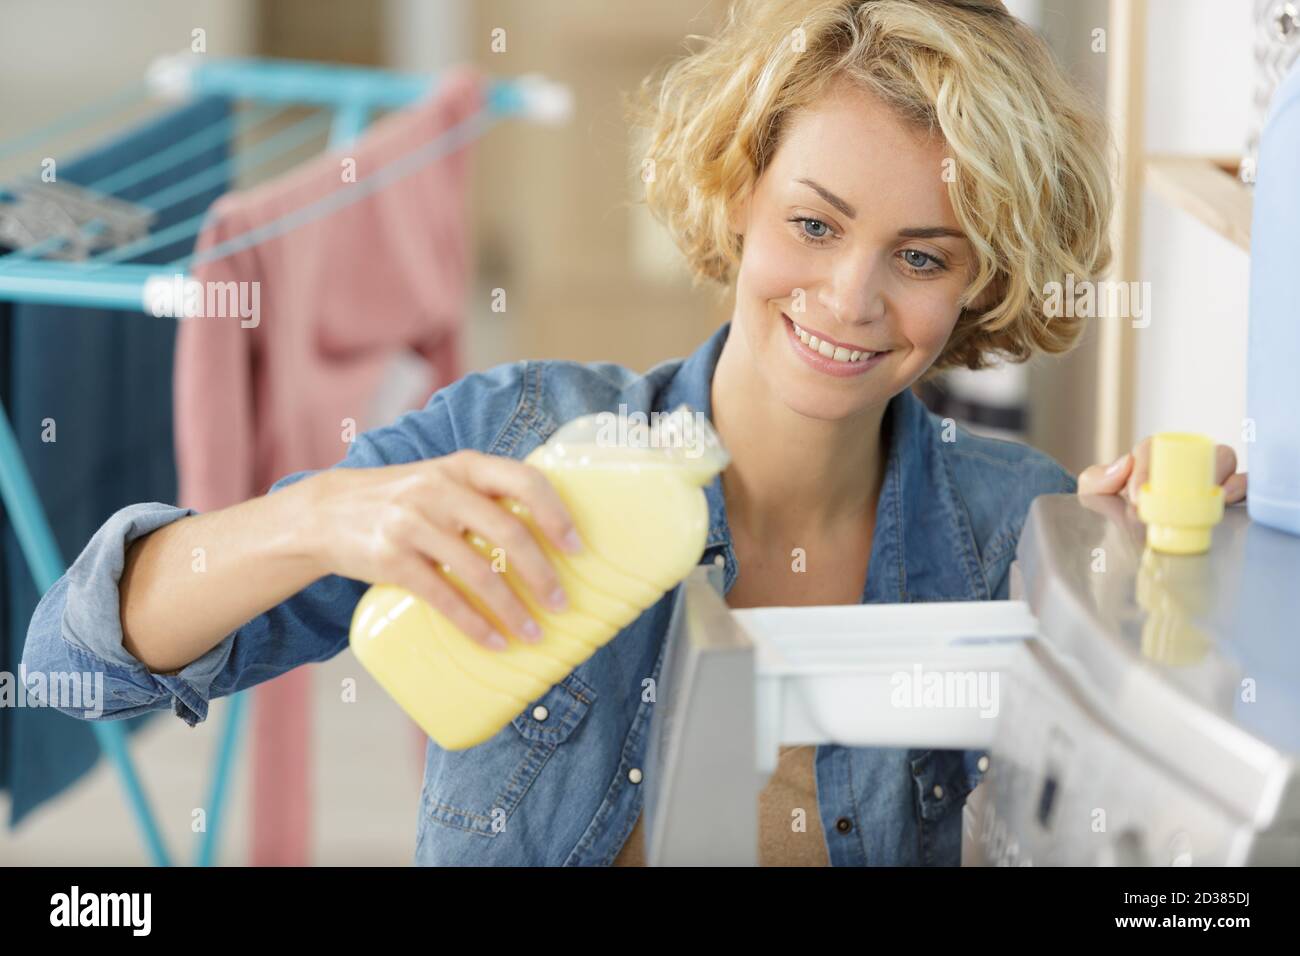 woman pouring fabric conditioner into washing machine drawer Stock Photo